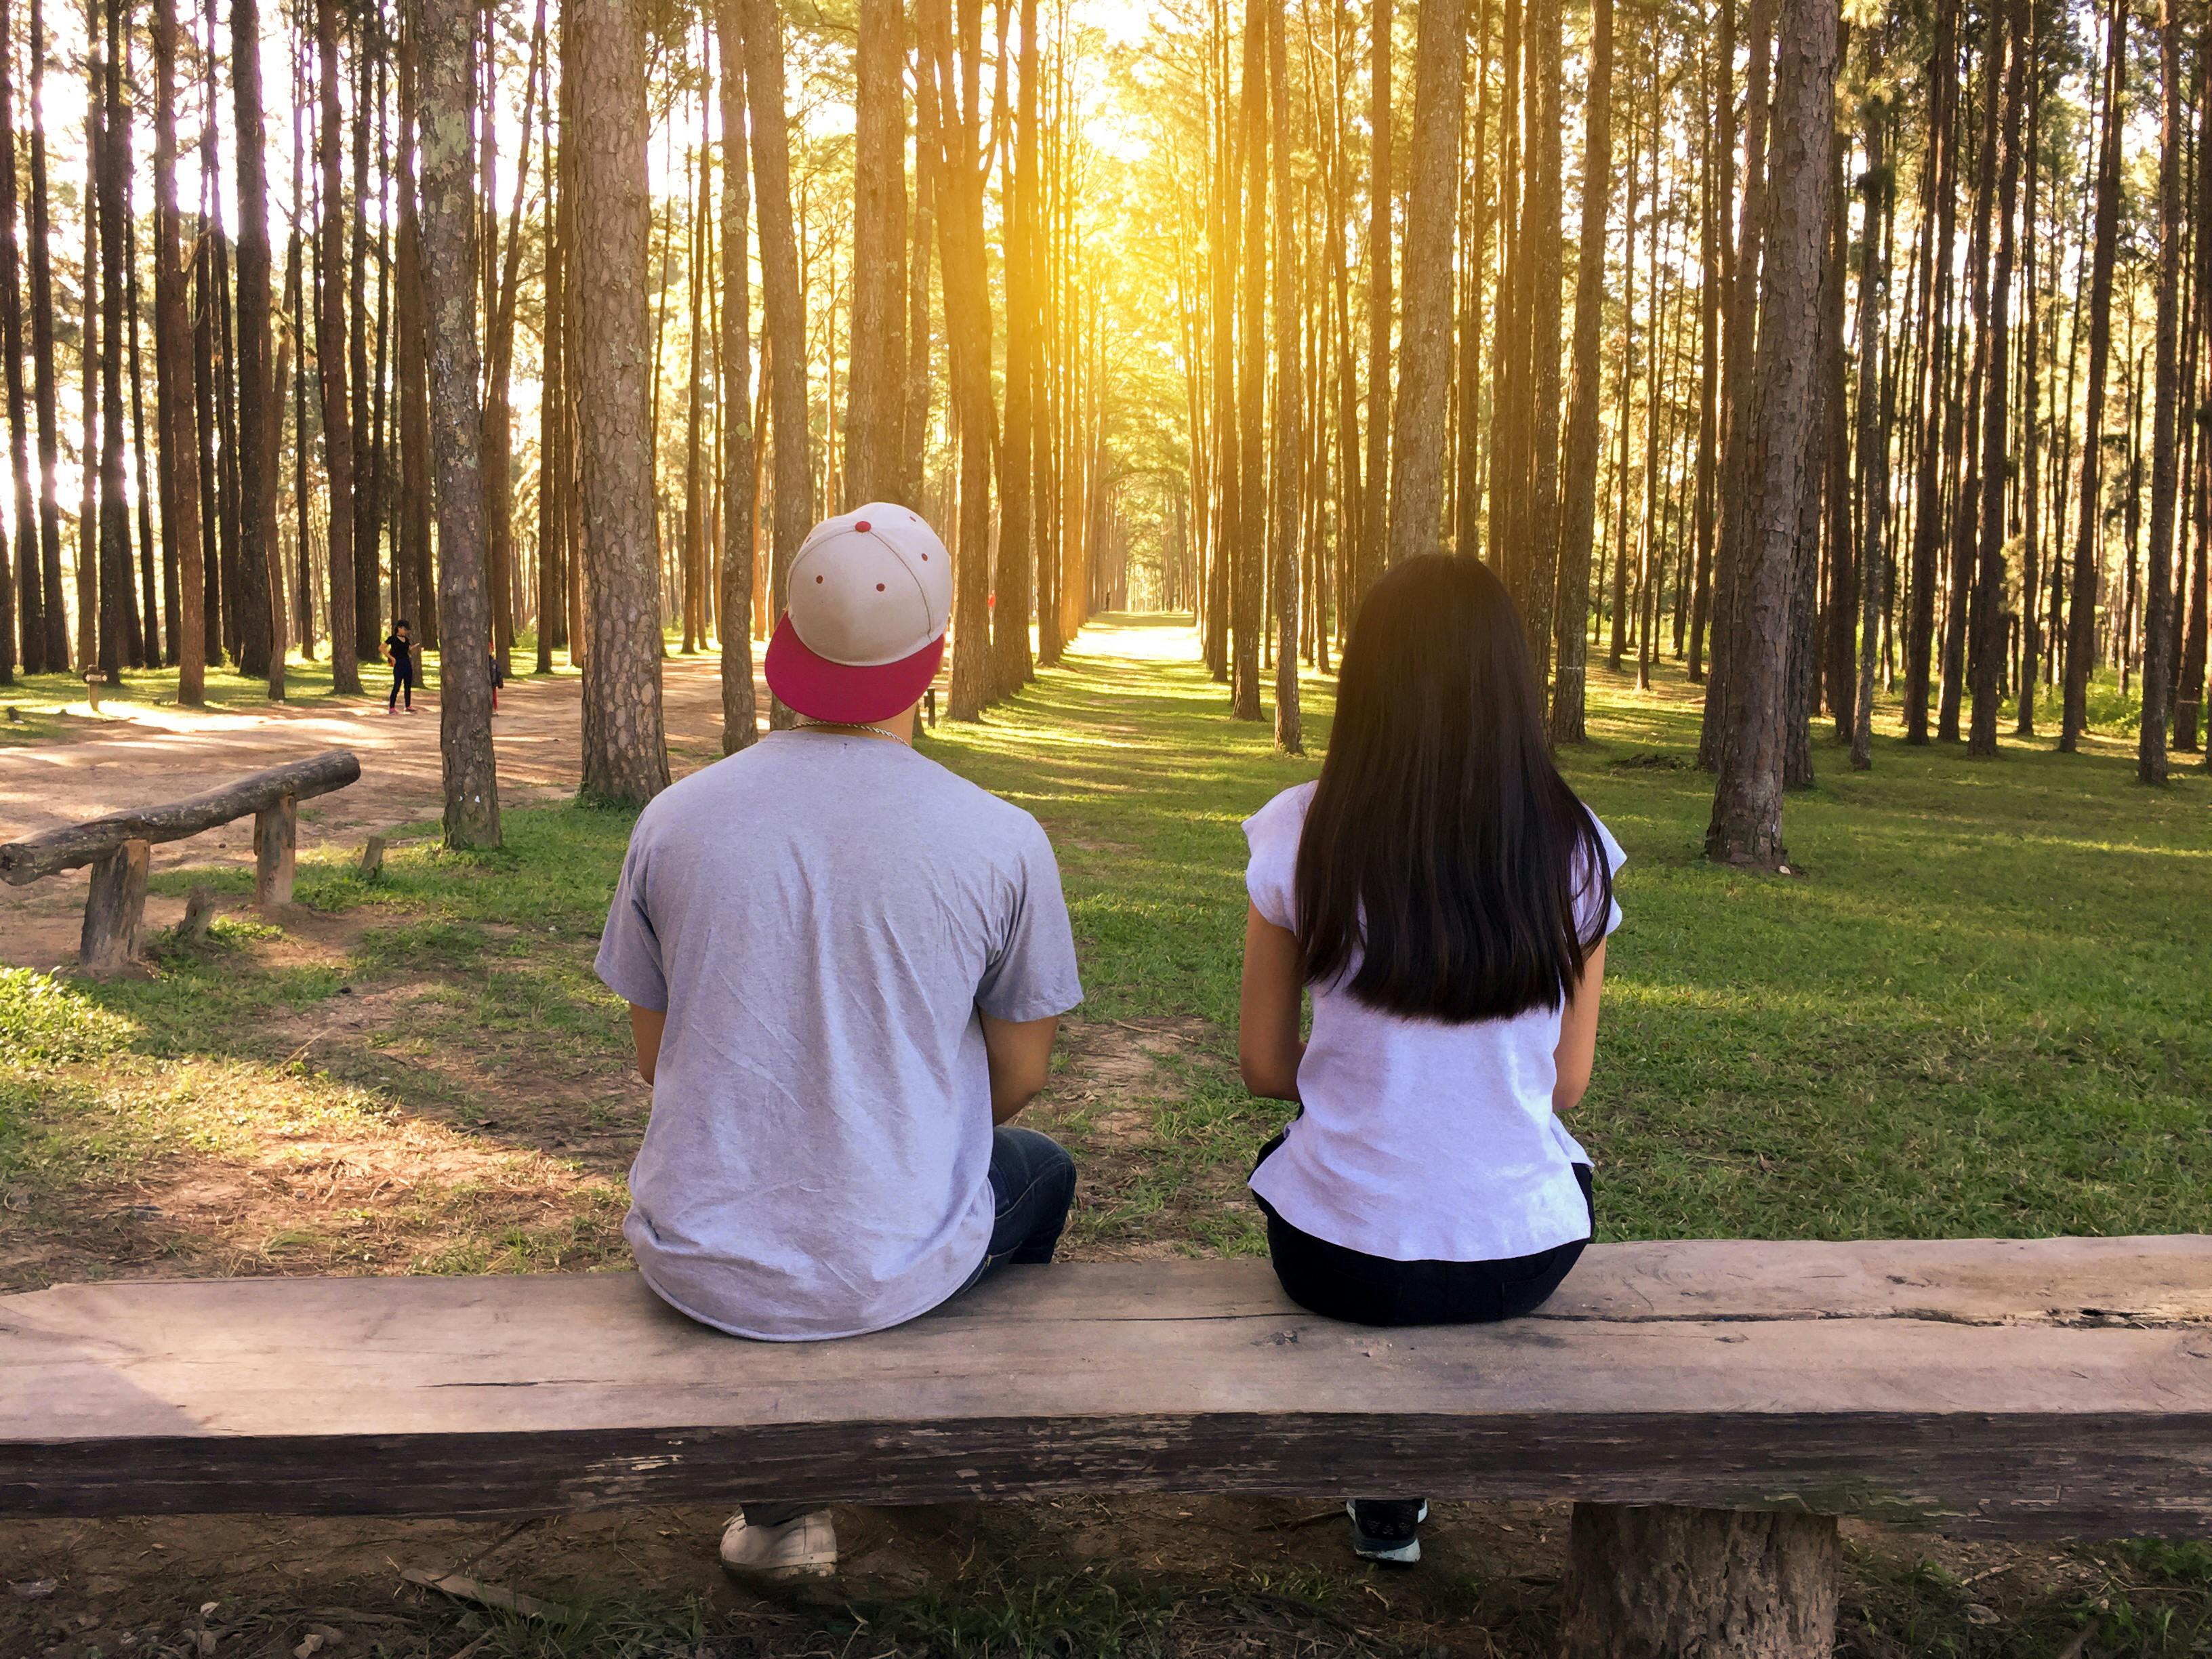 A couple sitting on a bench | Source: Pexels